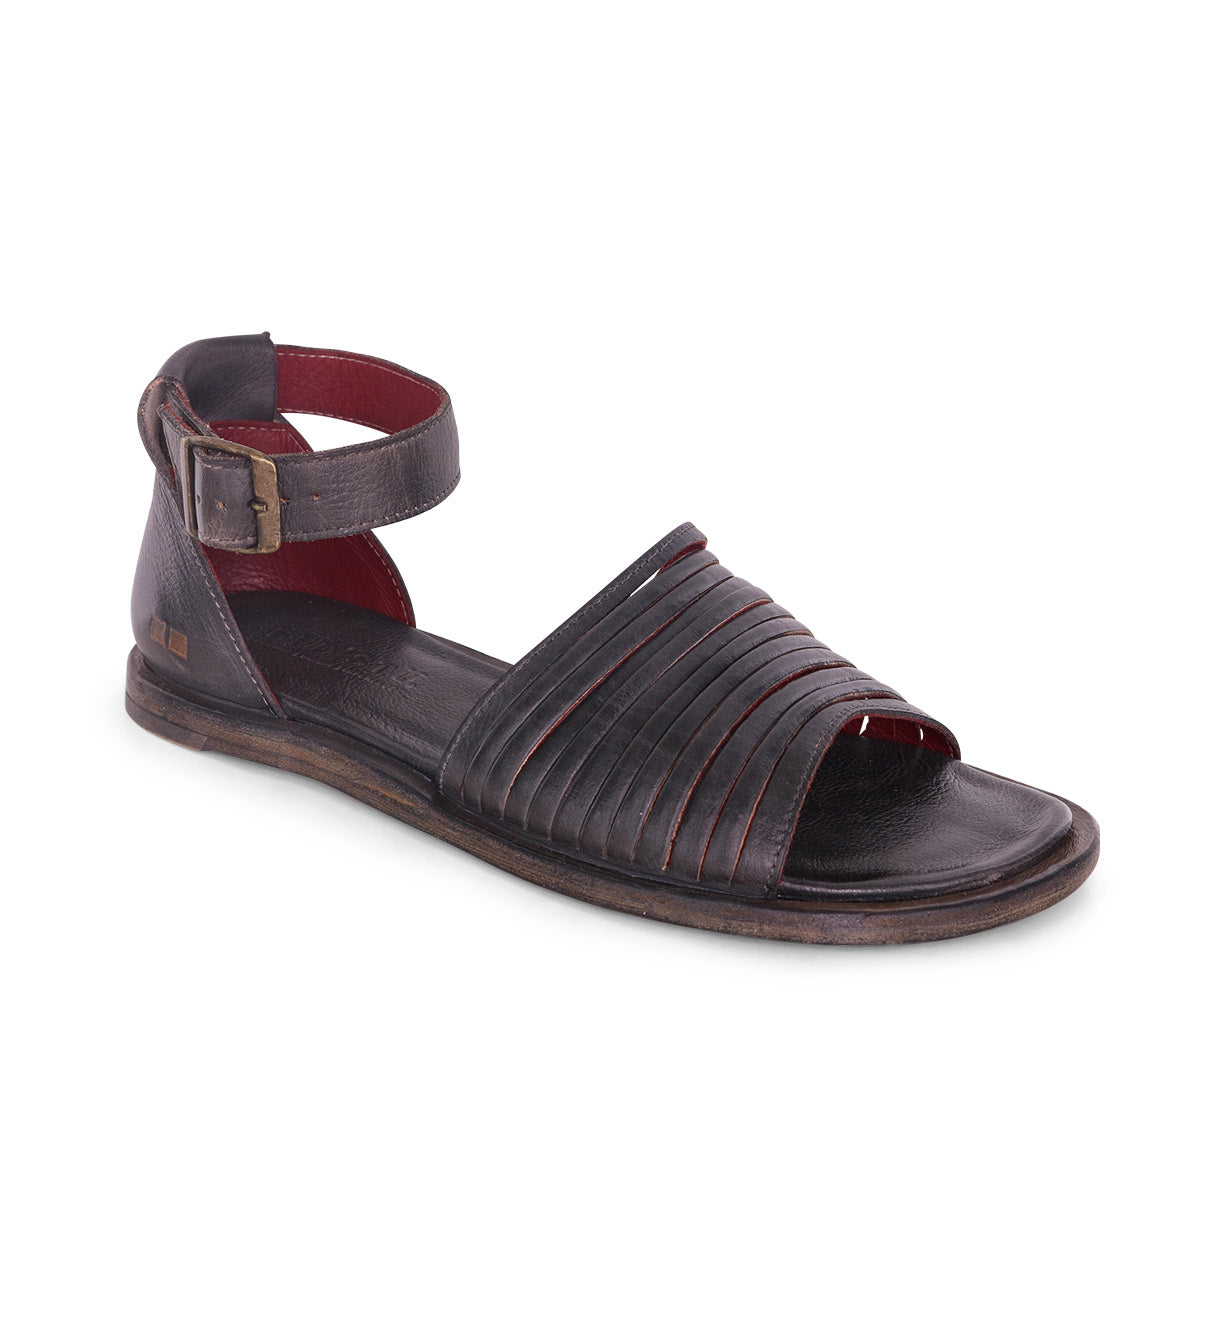 A women's Bed Stu Lilia black leather sandal with two straps.